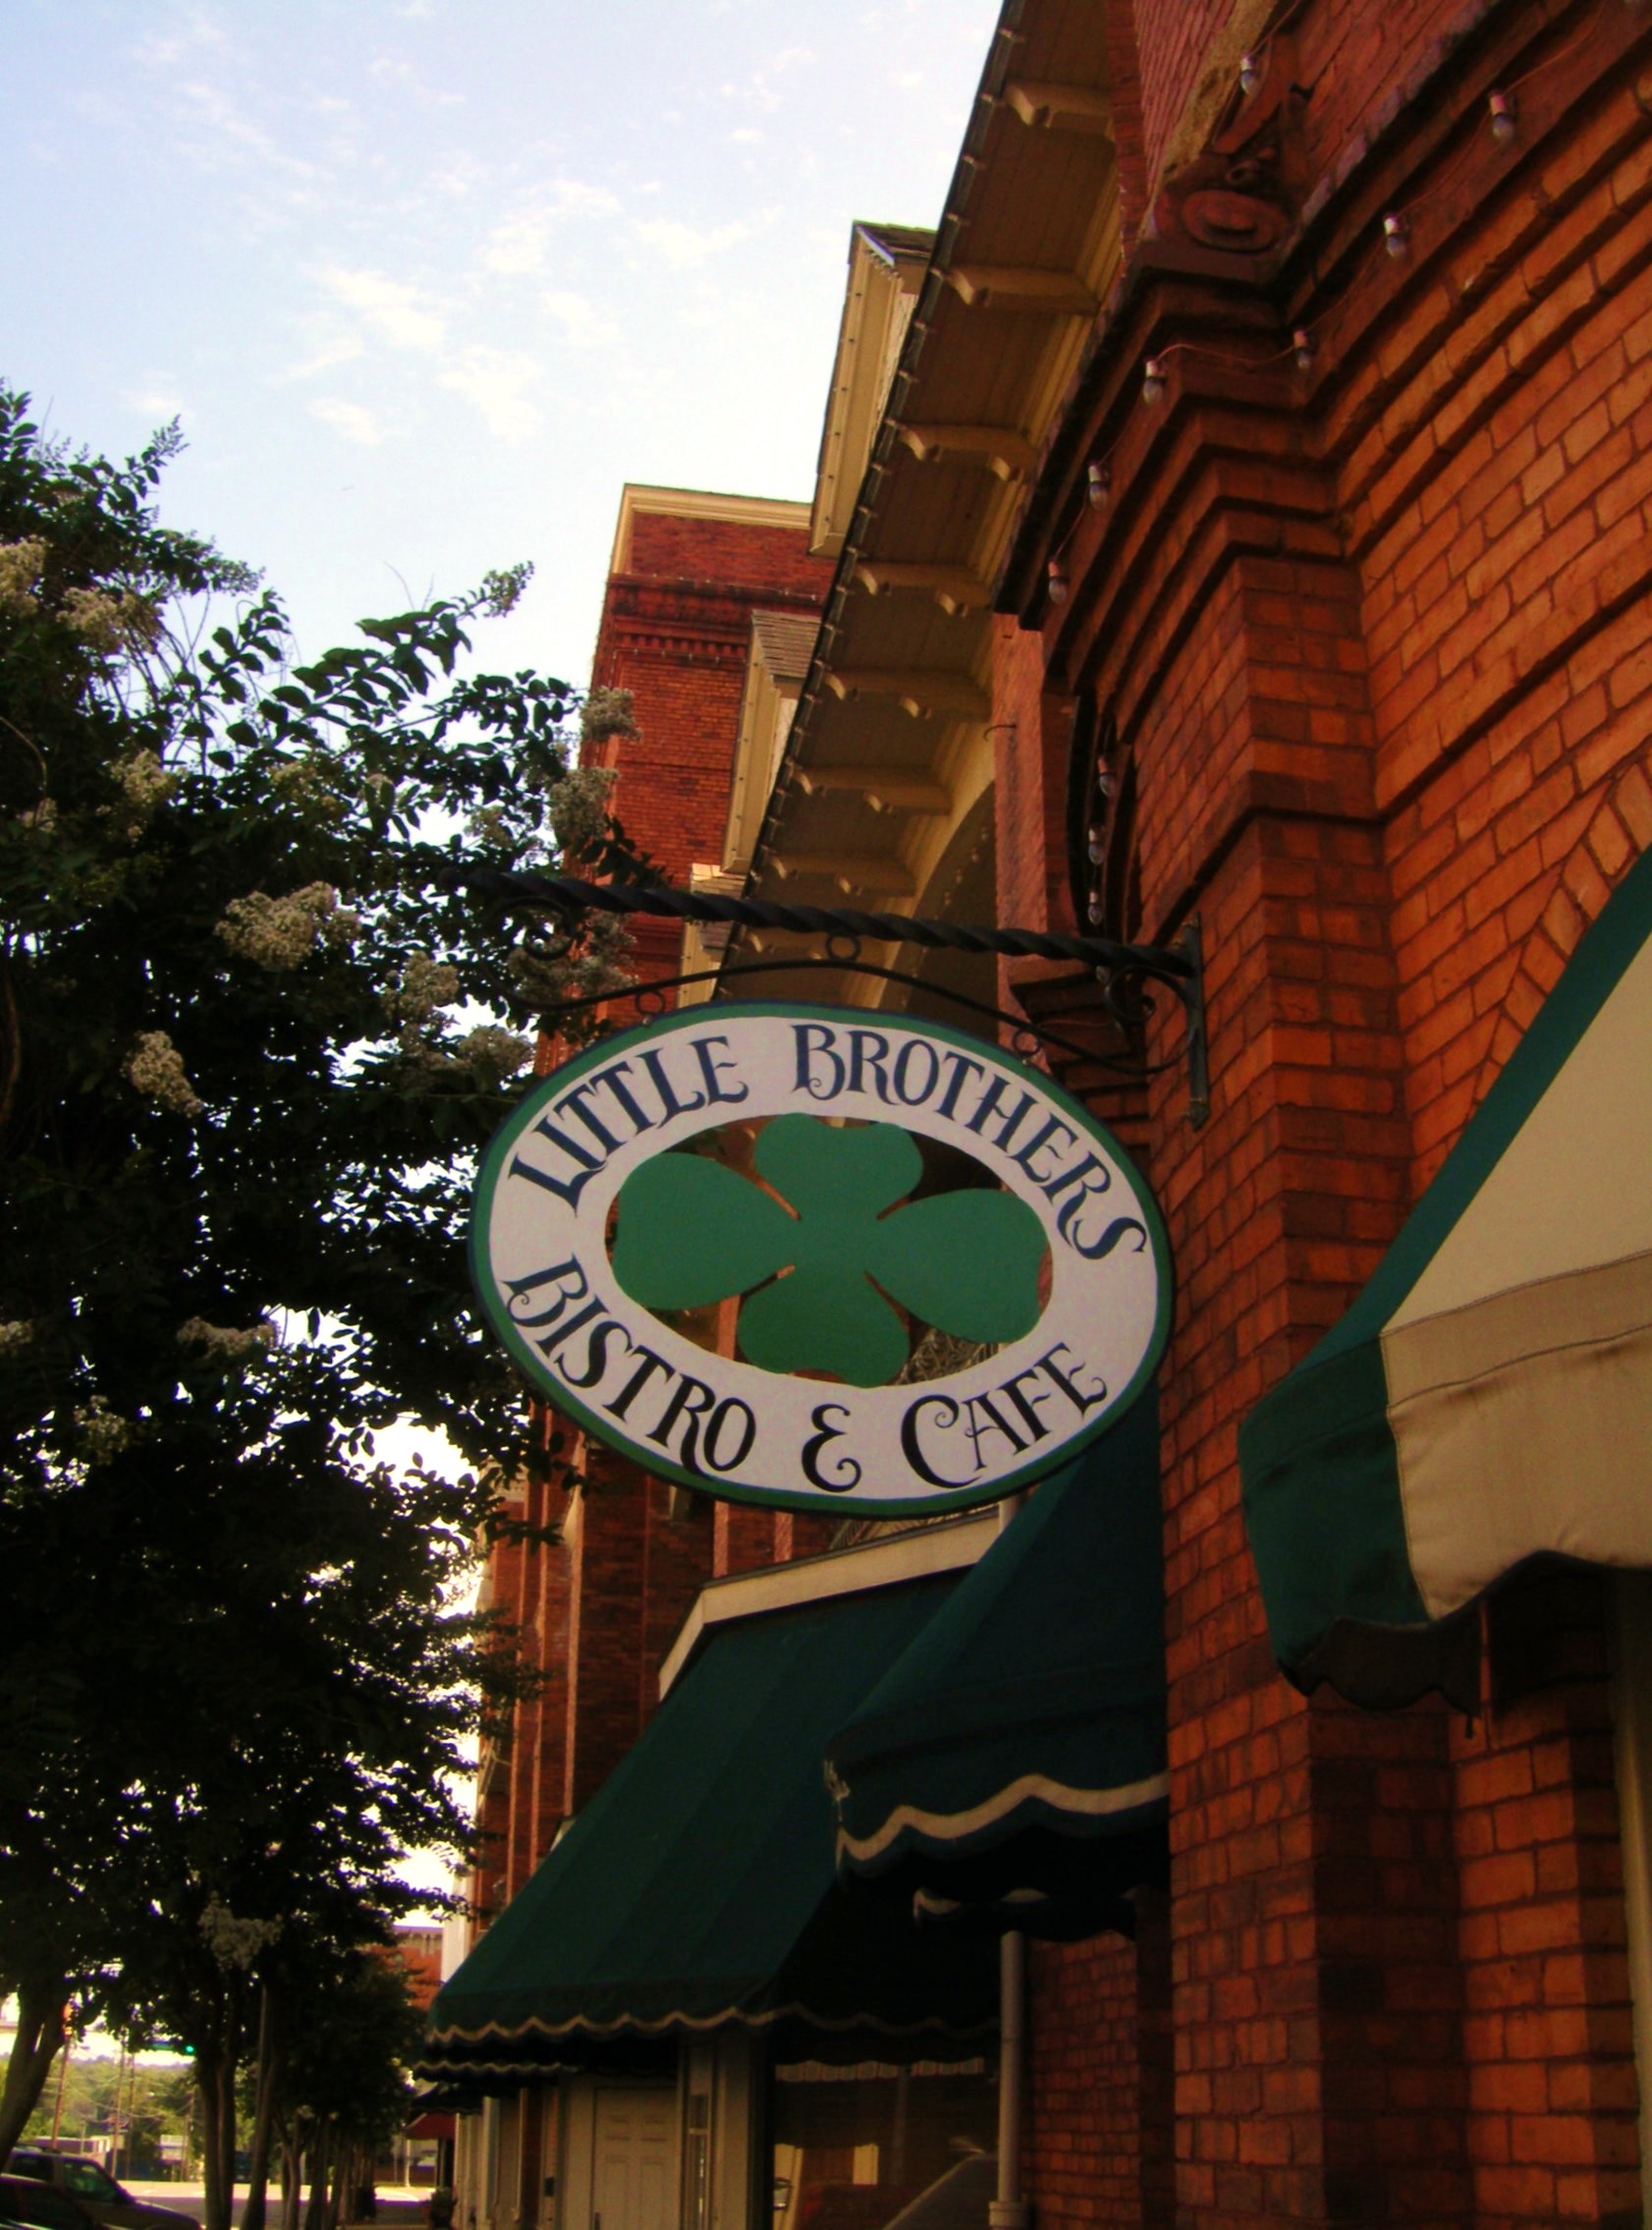 Little Brothers Bistro & Cafe